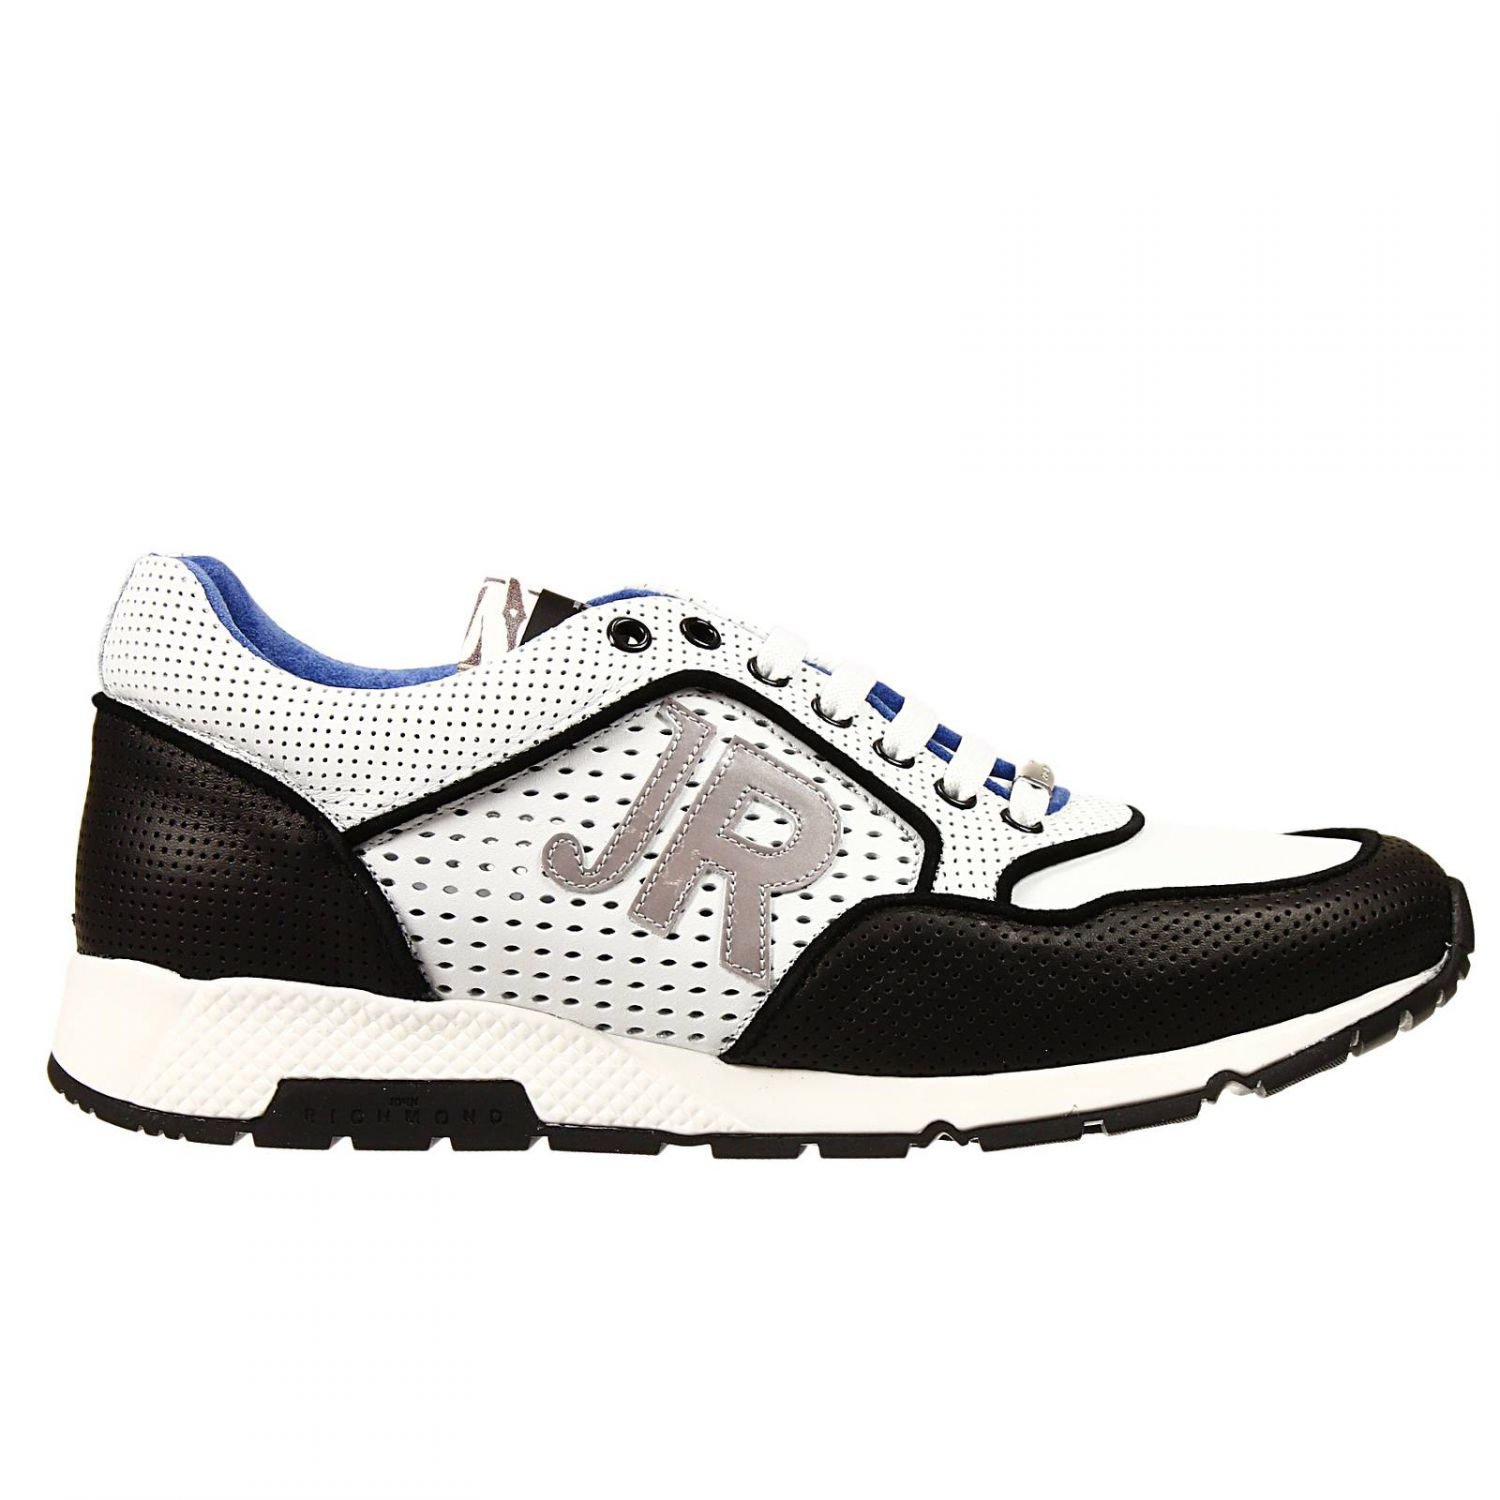 Lyst - John richmond Vimp Lasered Leather Sneakers Shoes ...